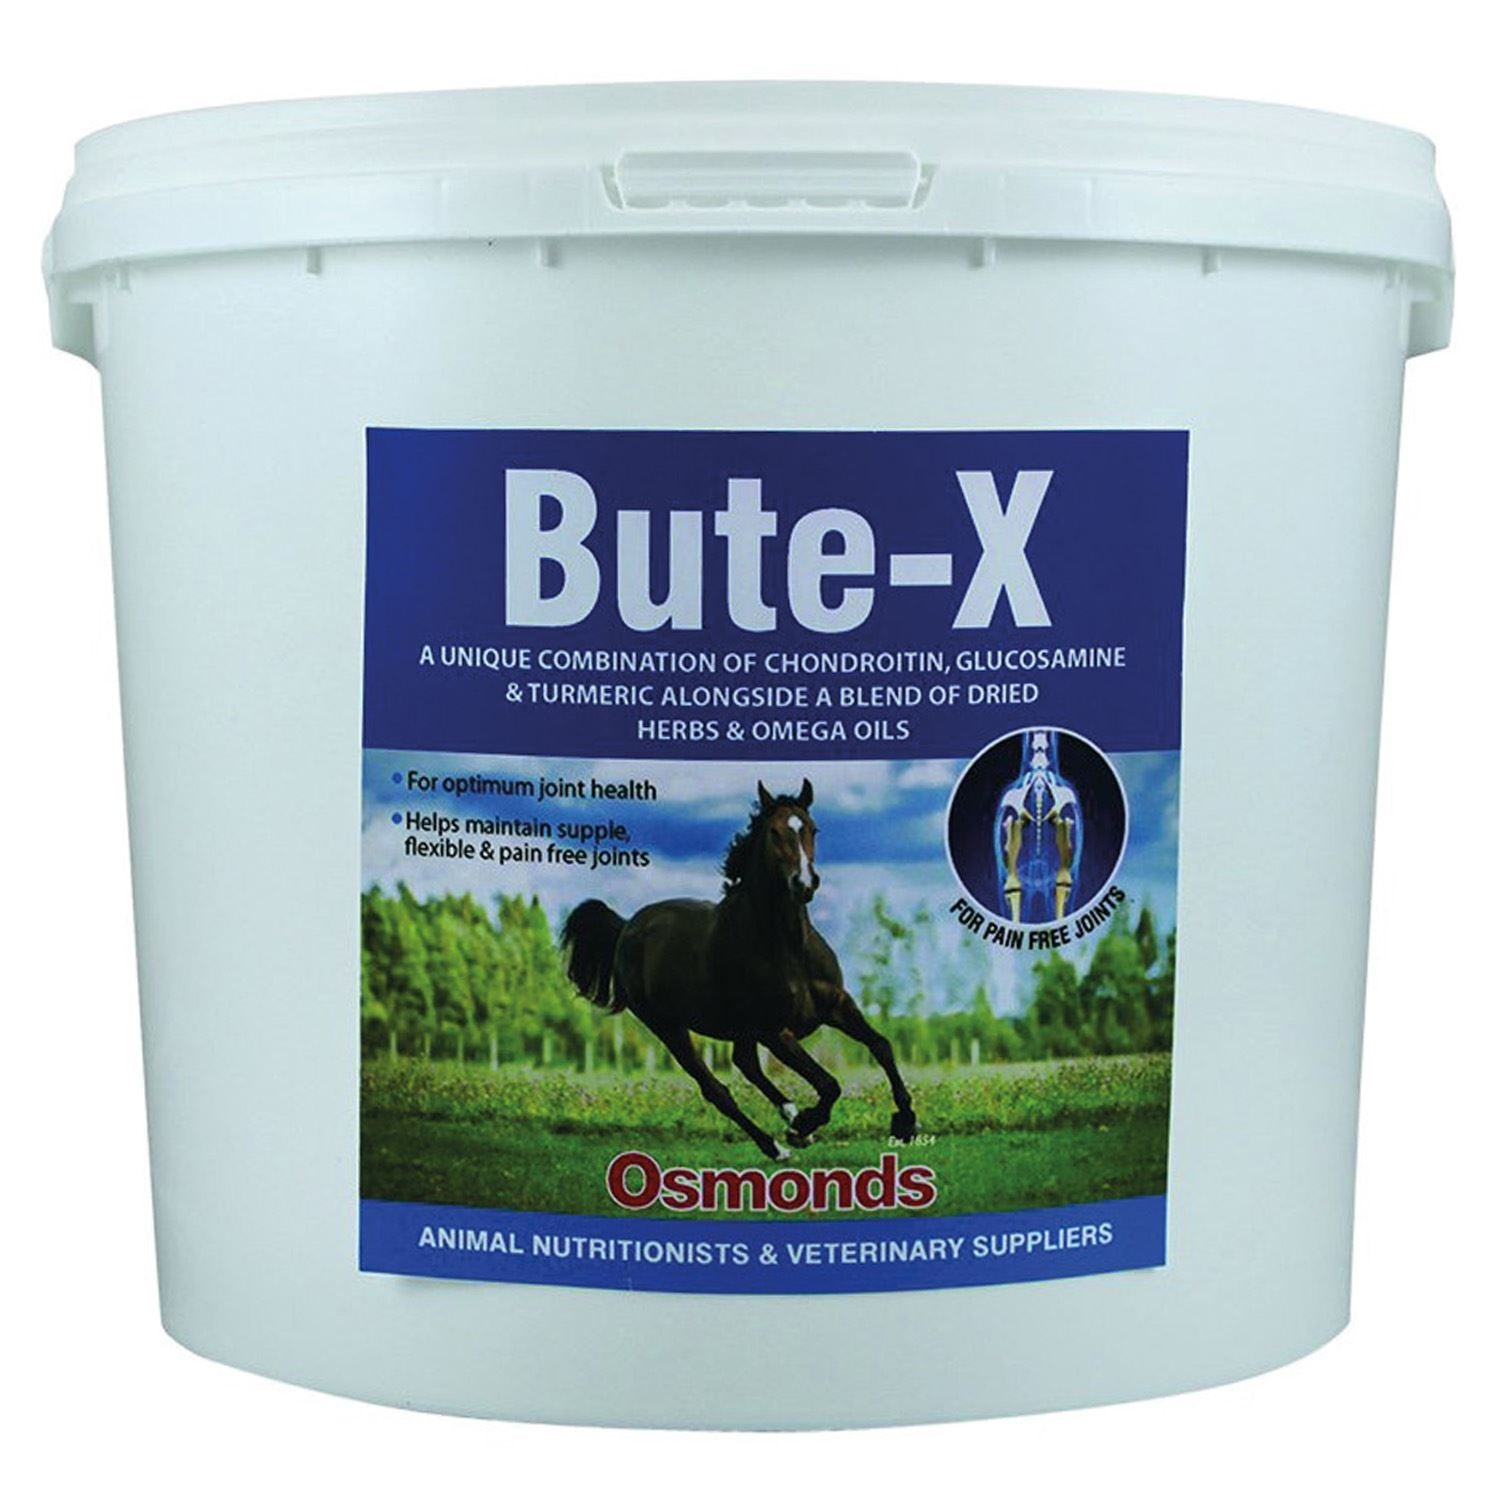 Osmonds Bute-X Dry Blend - Just Horse Riders